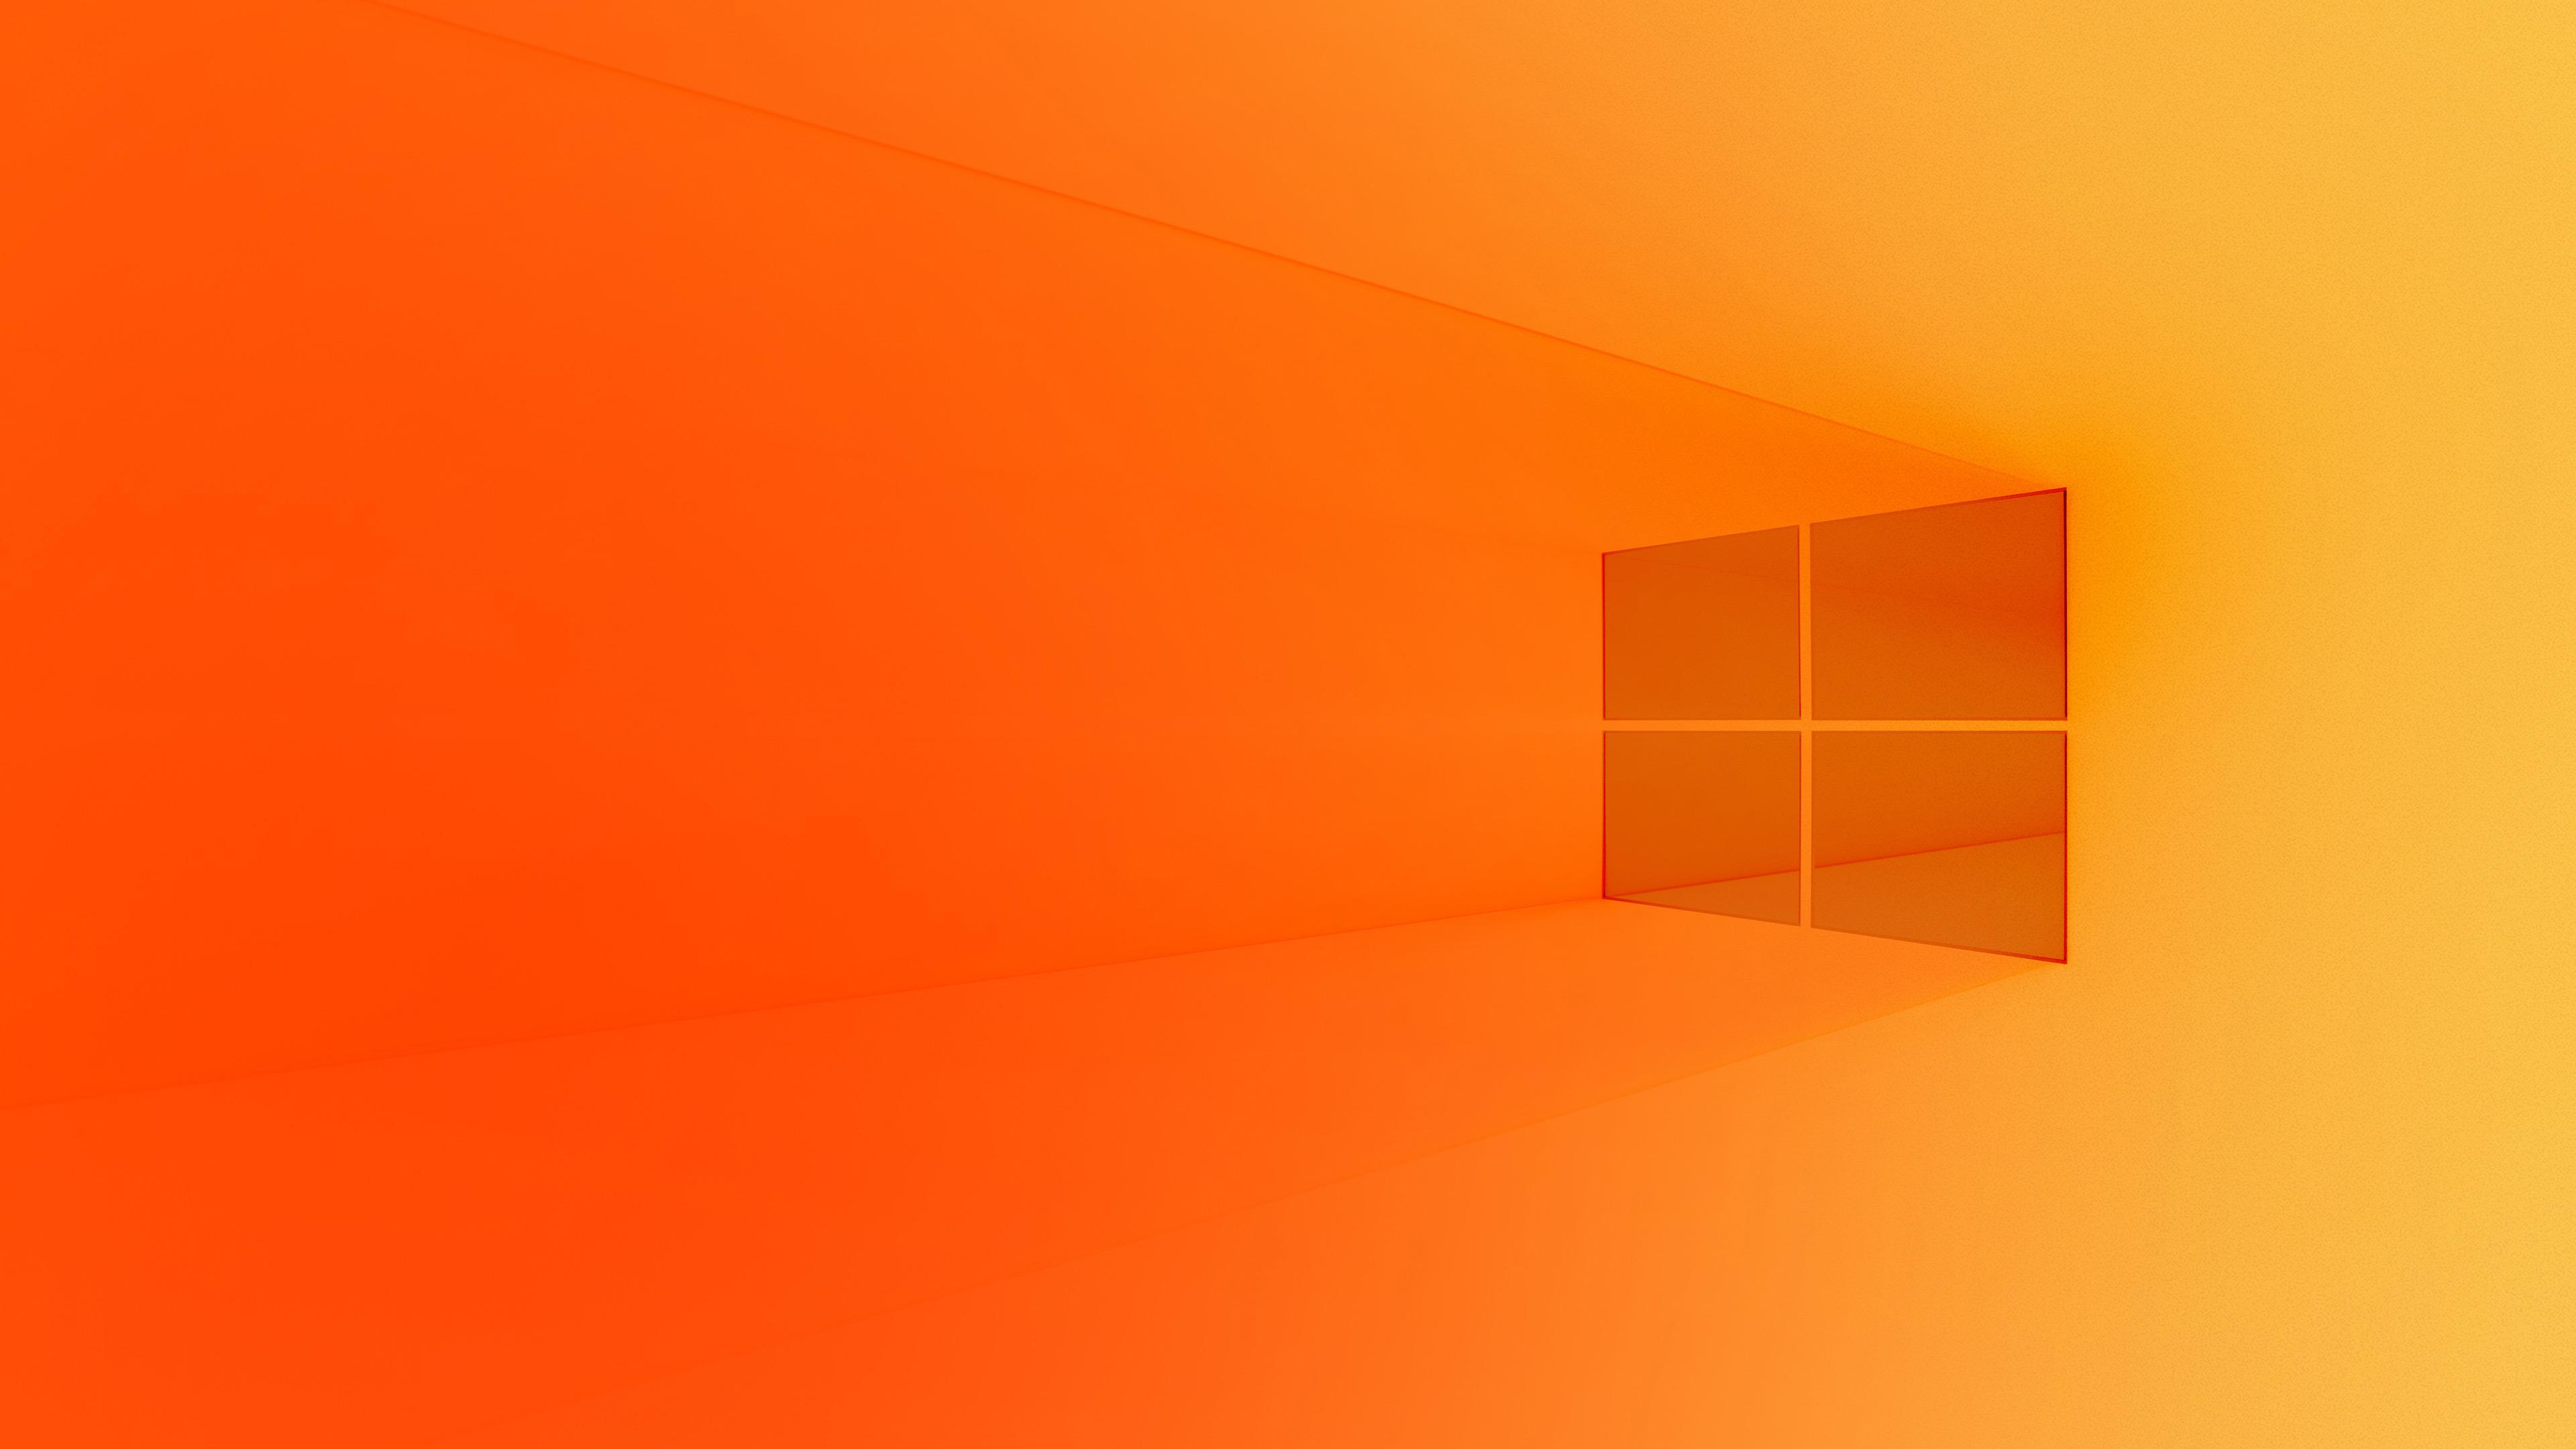 Custom color Windows 10 default wallpaper. Super simple to make your own using Gimp or Photoshop. : Windows10